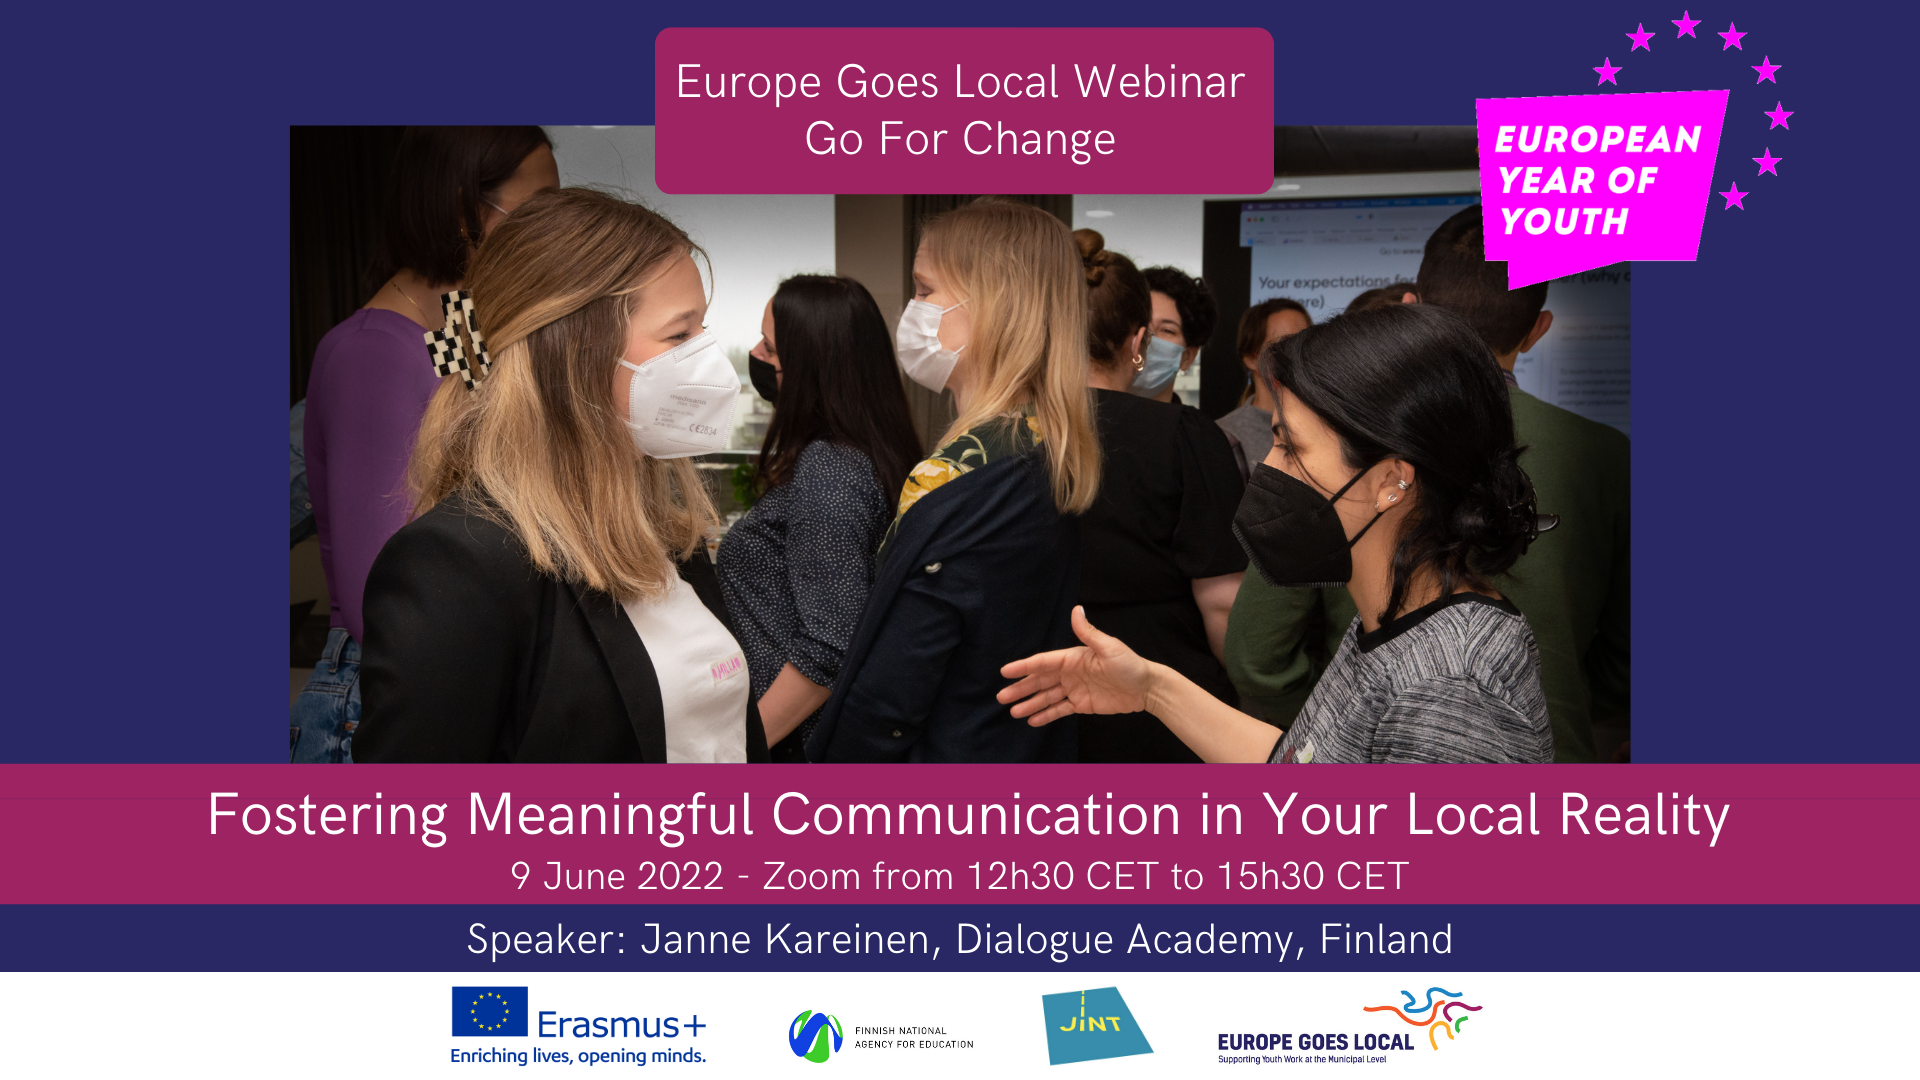 Call for participants: Webinar on Fostering Meaningful Communication in Local Reality